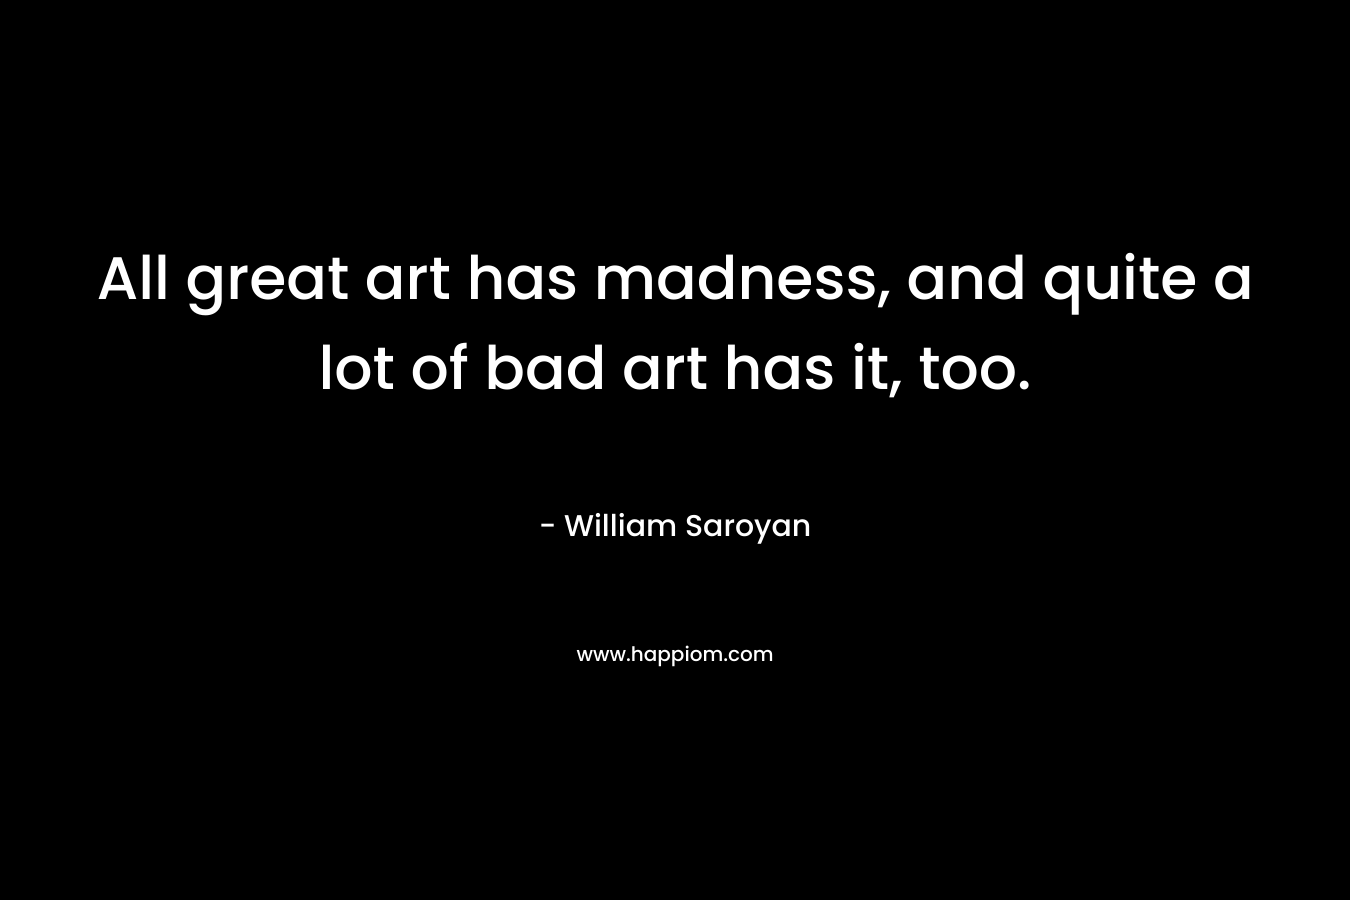 All great art has madness, and quite a lot of bad art has it, too. – William Saroyan